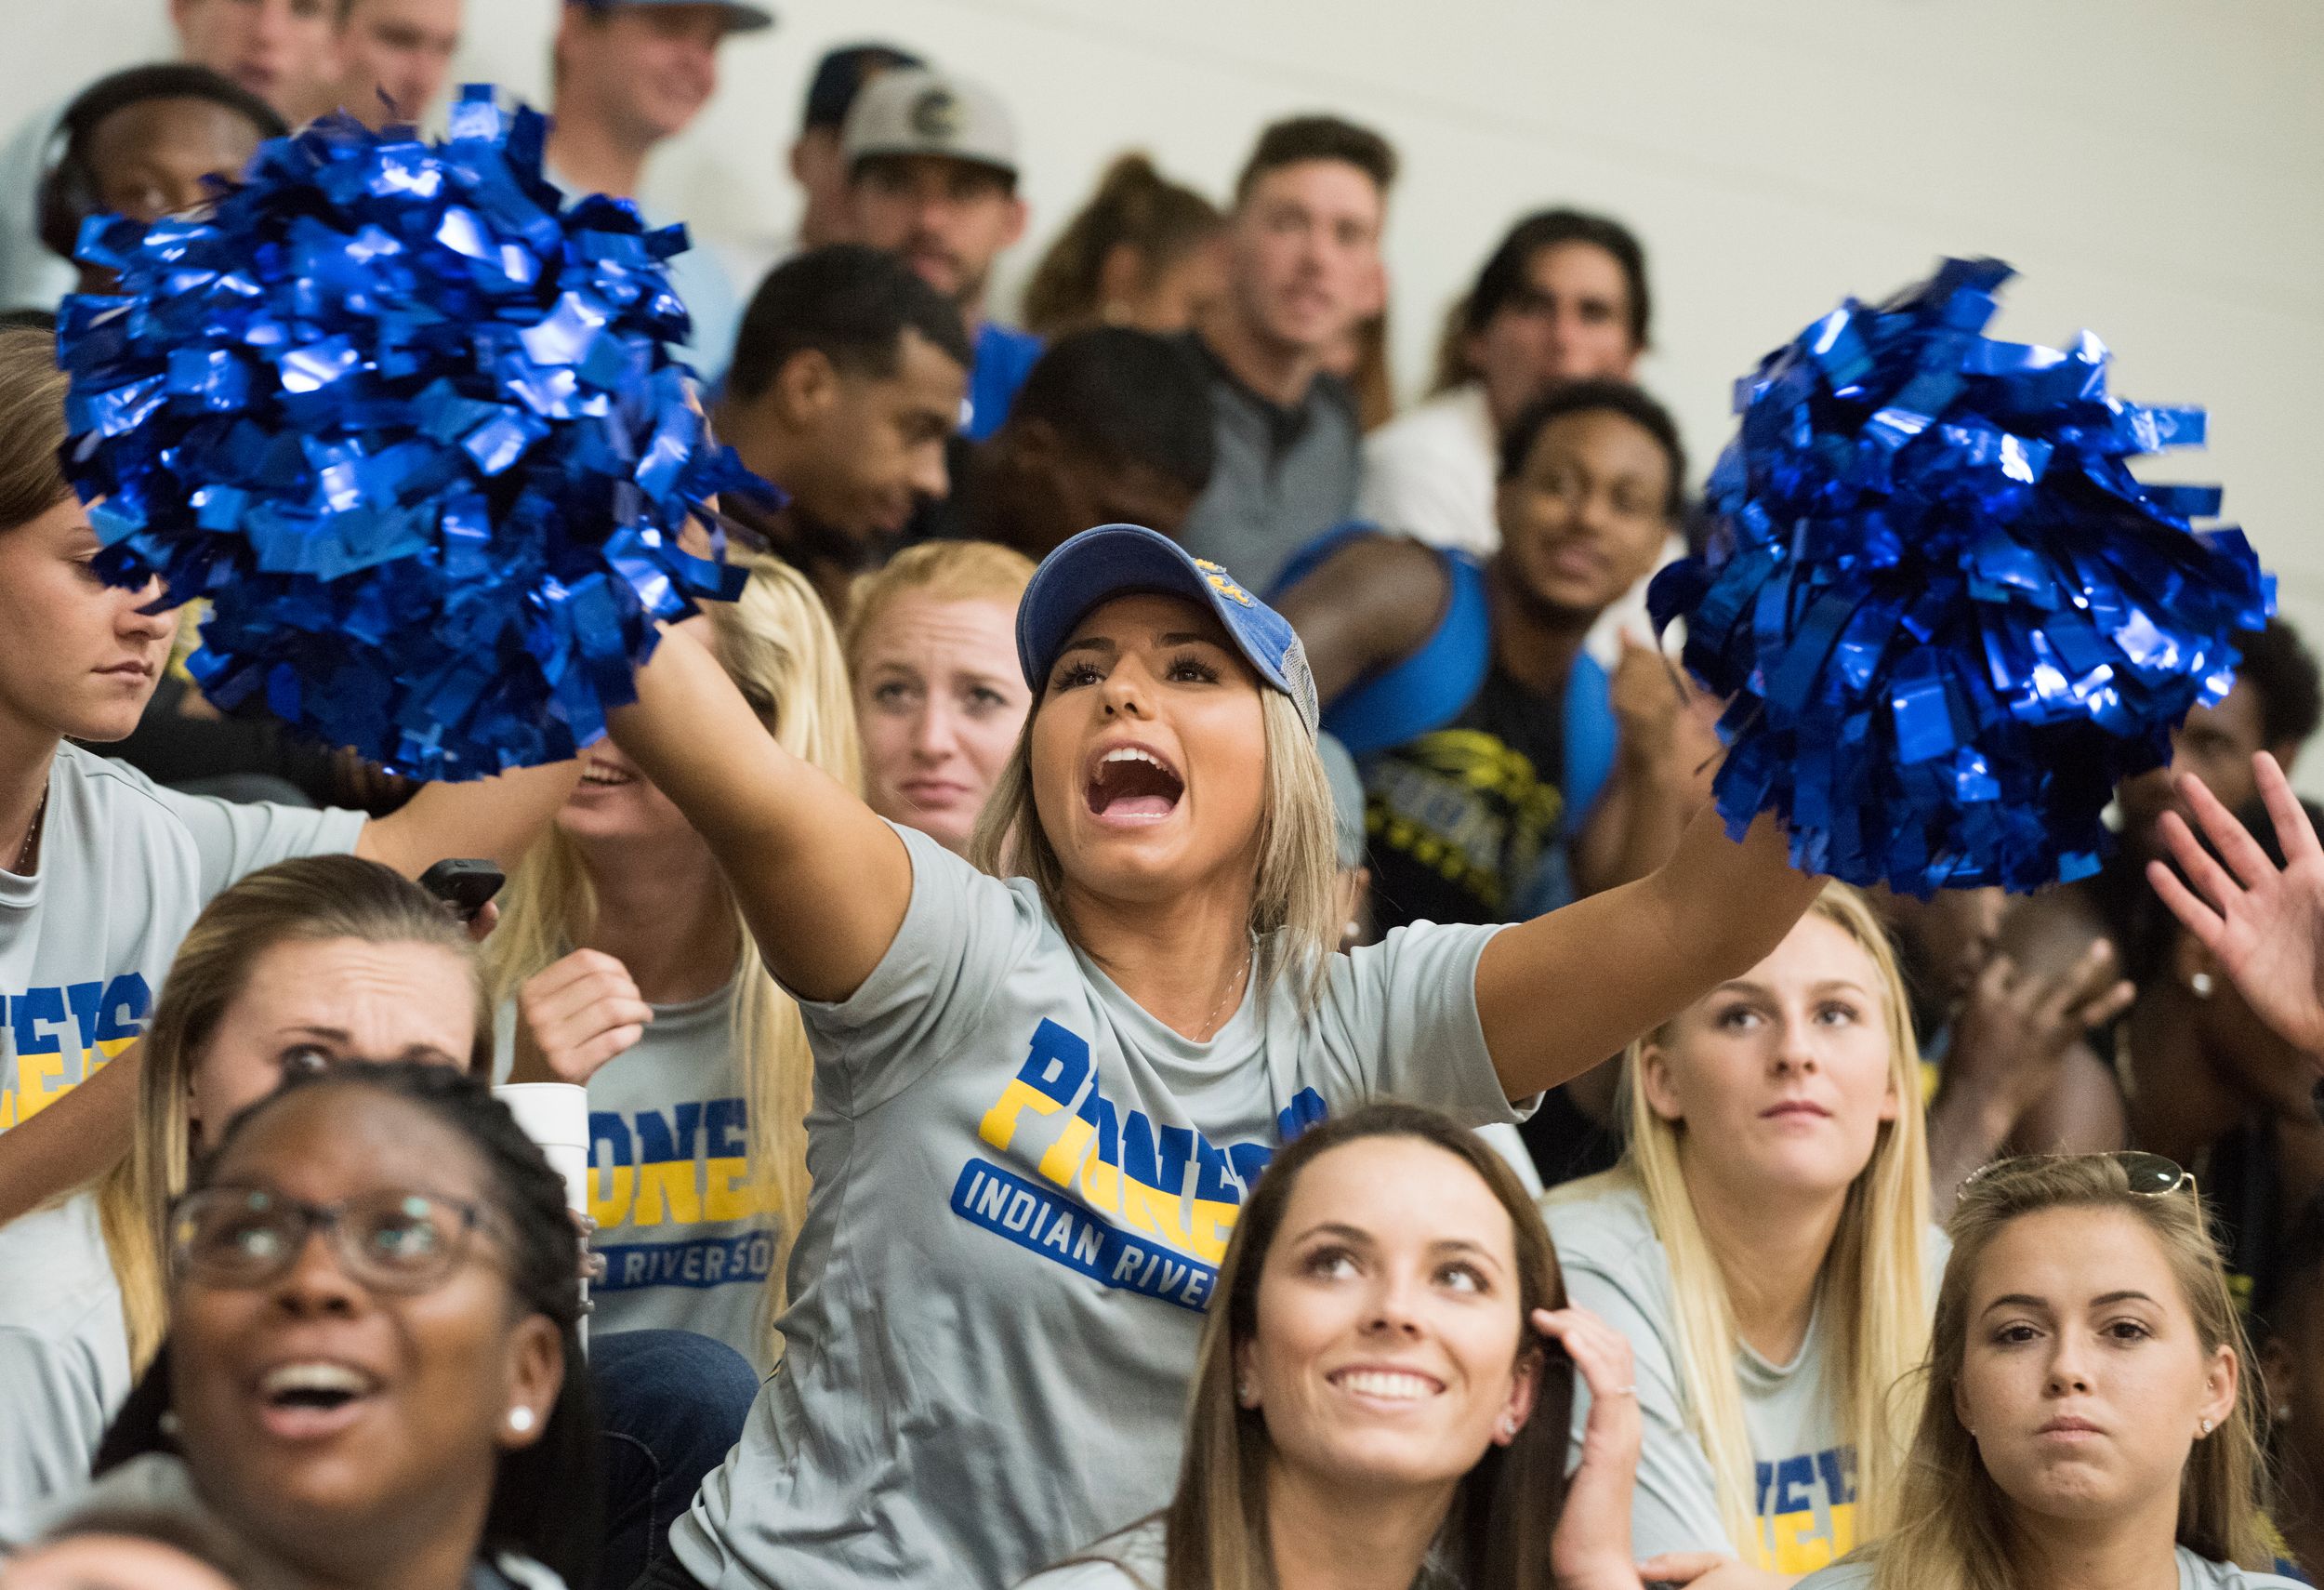 Student cheering in crowded stadium stands with blue pom poms.